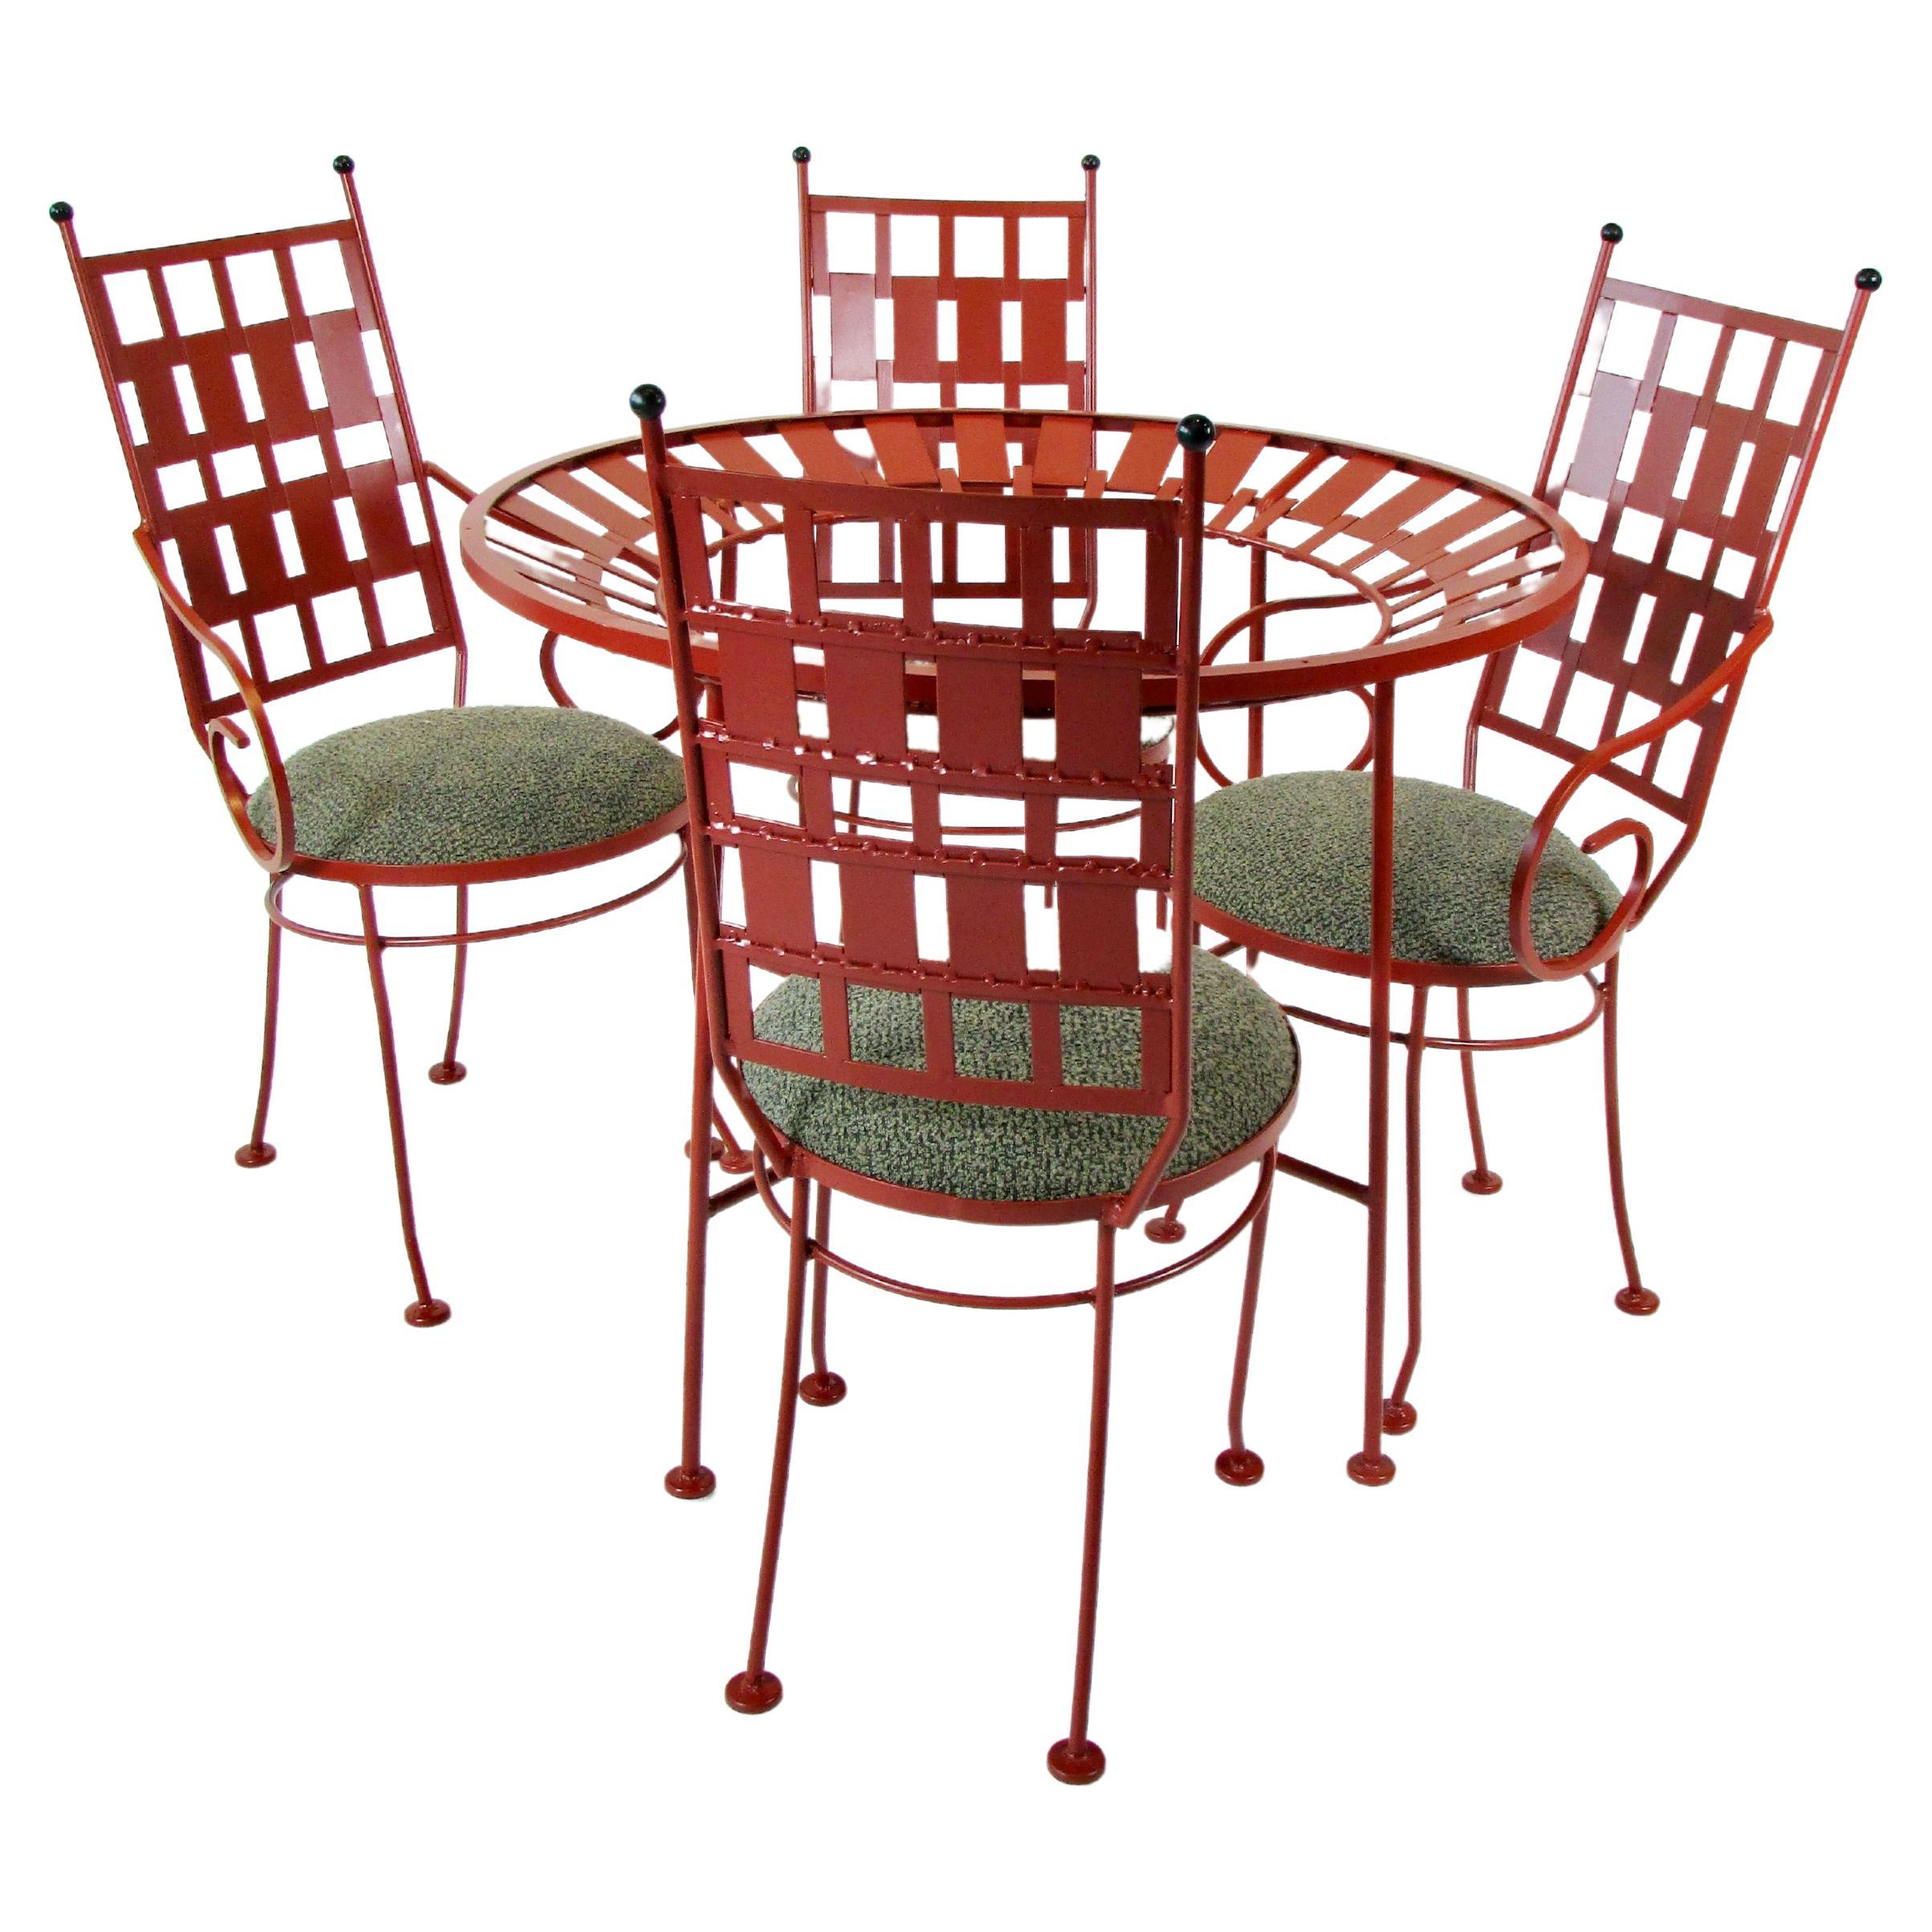 Arthur Umanoff round wrought iron table with four chairs in terra cotta finish